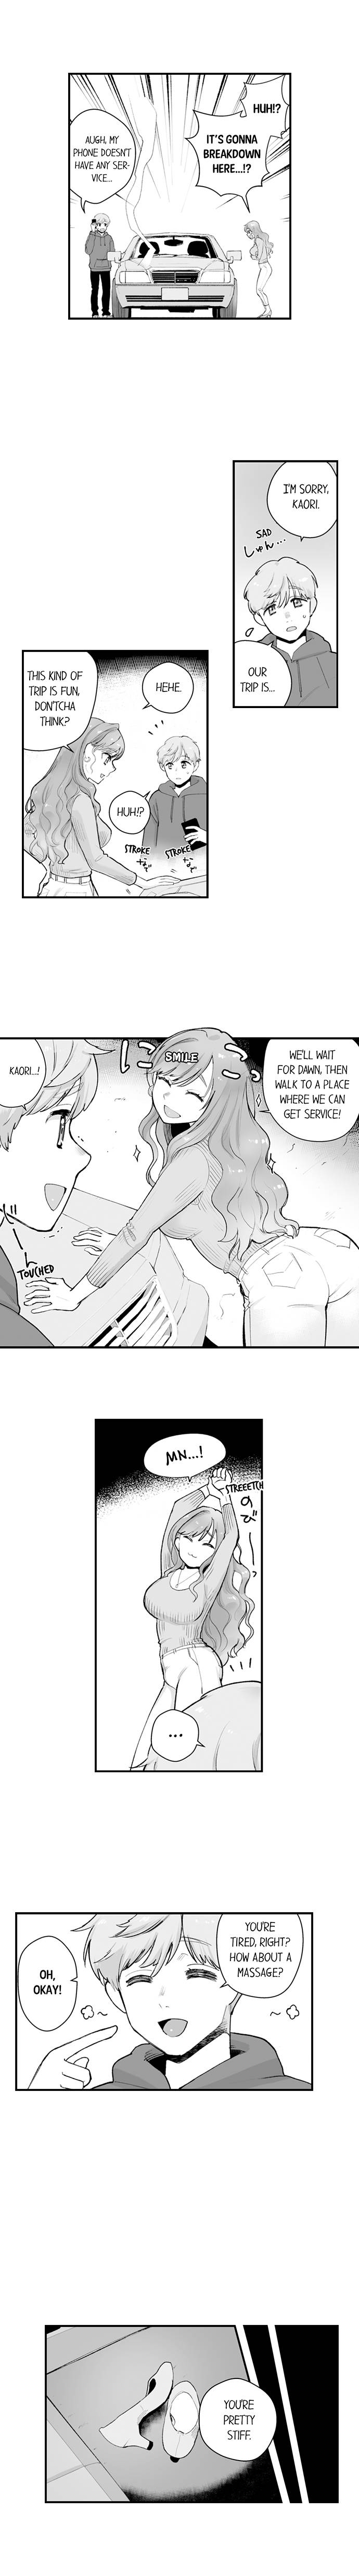 The Massage ♂♀ The Pleasure of Full Course Sex Chapter 8 - Page 3